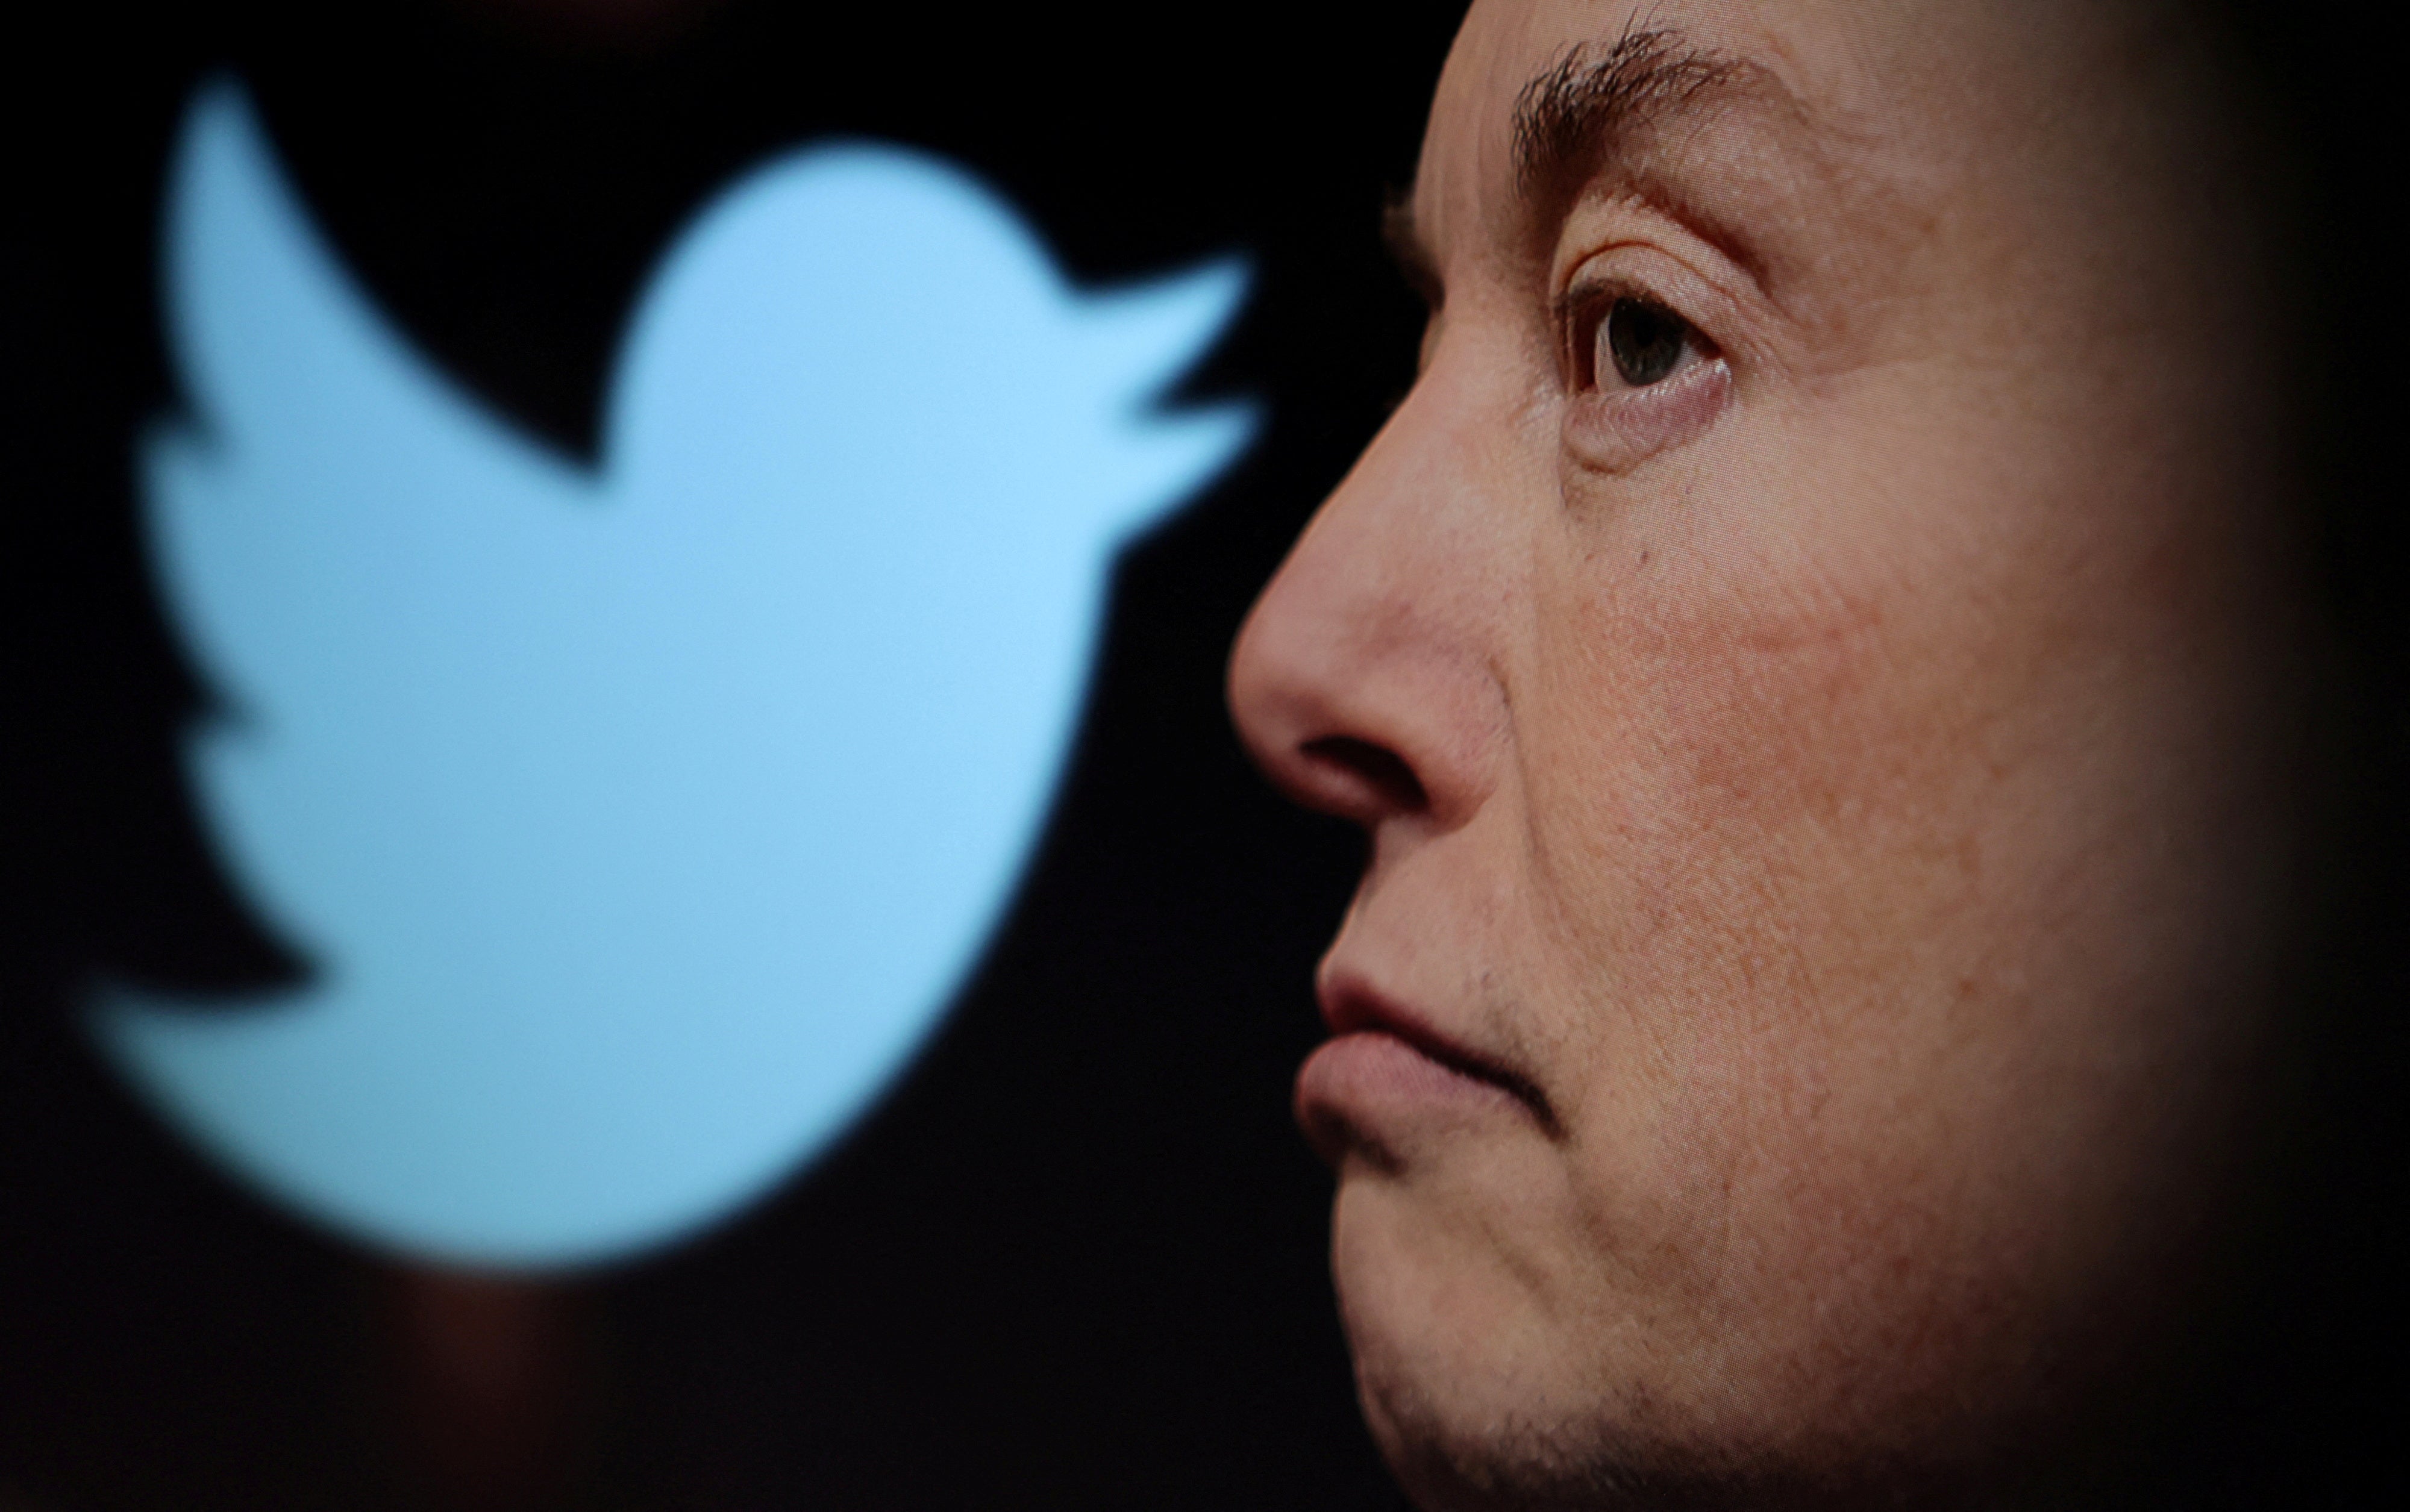 For Elon Musk, Twitter is a vanity purchase